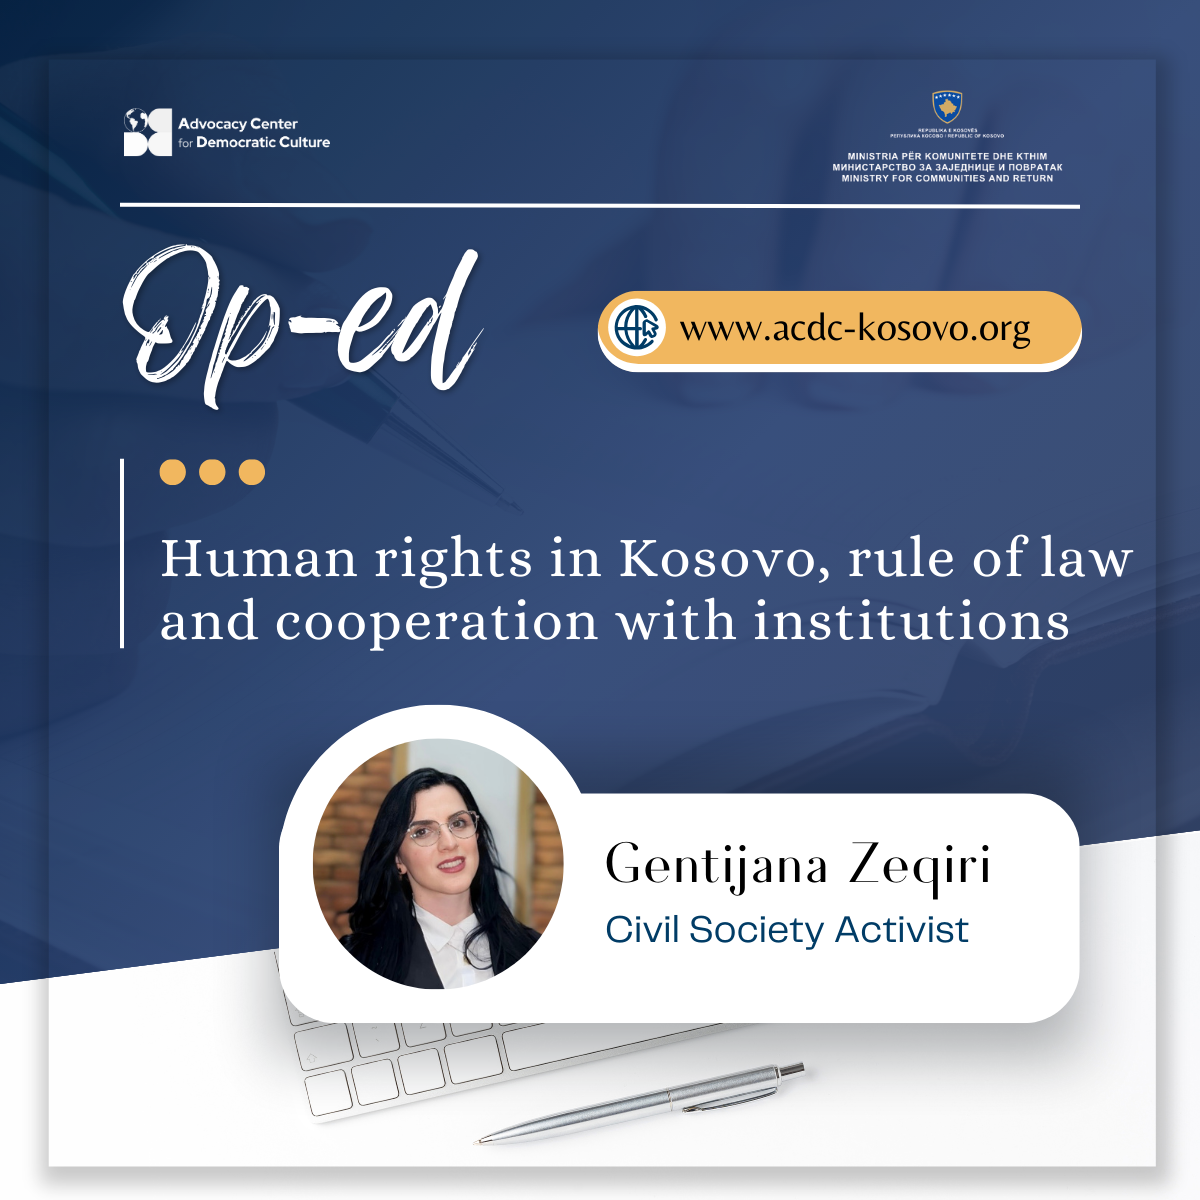 op-ed-human-rights-in-kosovo-rule-of-law-and-cooperation-with-institutions